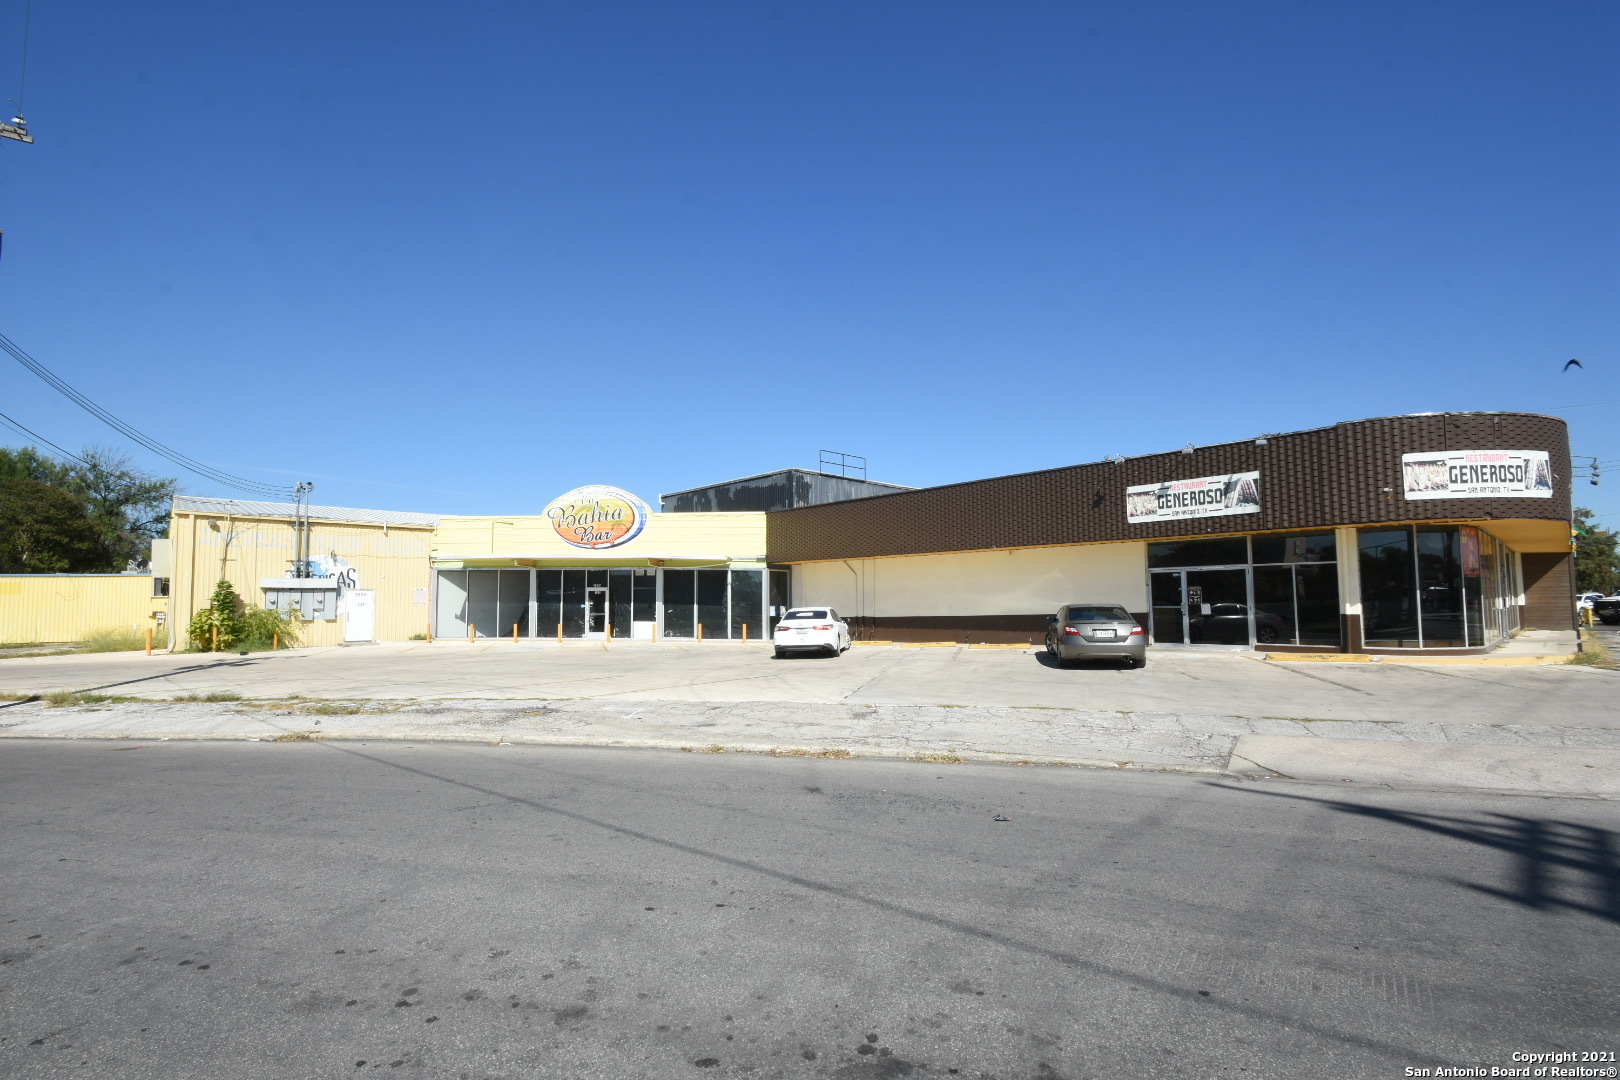 LOCATION LOCATION LOCATION, Excellent retail center on a busy street on the corner of San Pedro and Olmos St. Restaurant, Bar, Warehouse, you name it, also for lease separately, income ready